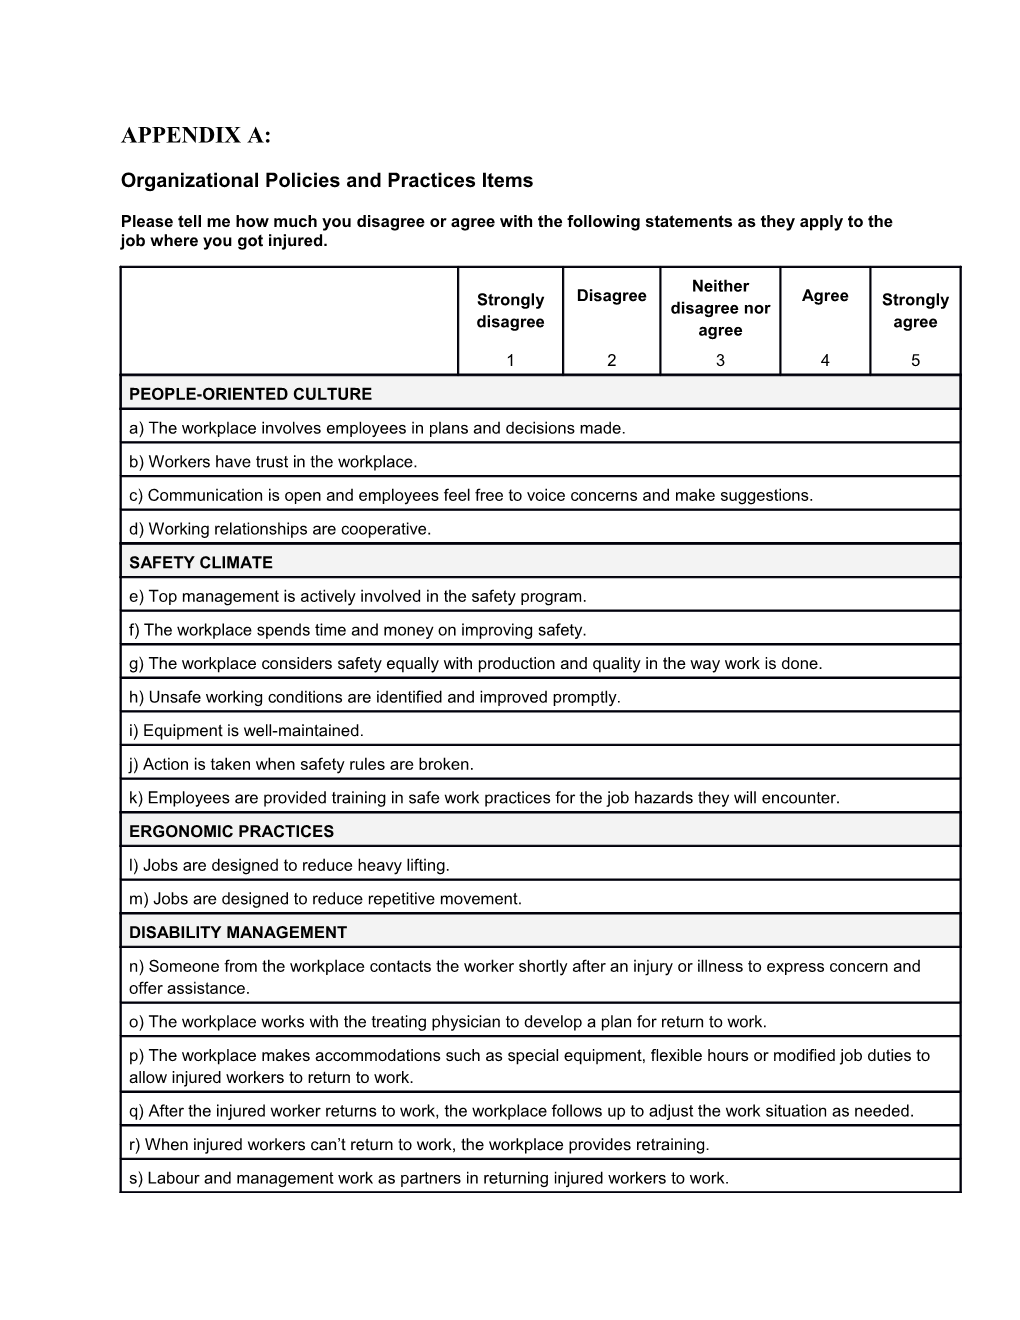 Organizational Policies and Practices Items